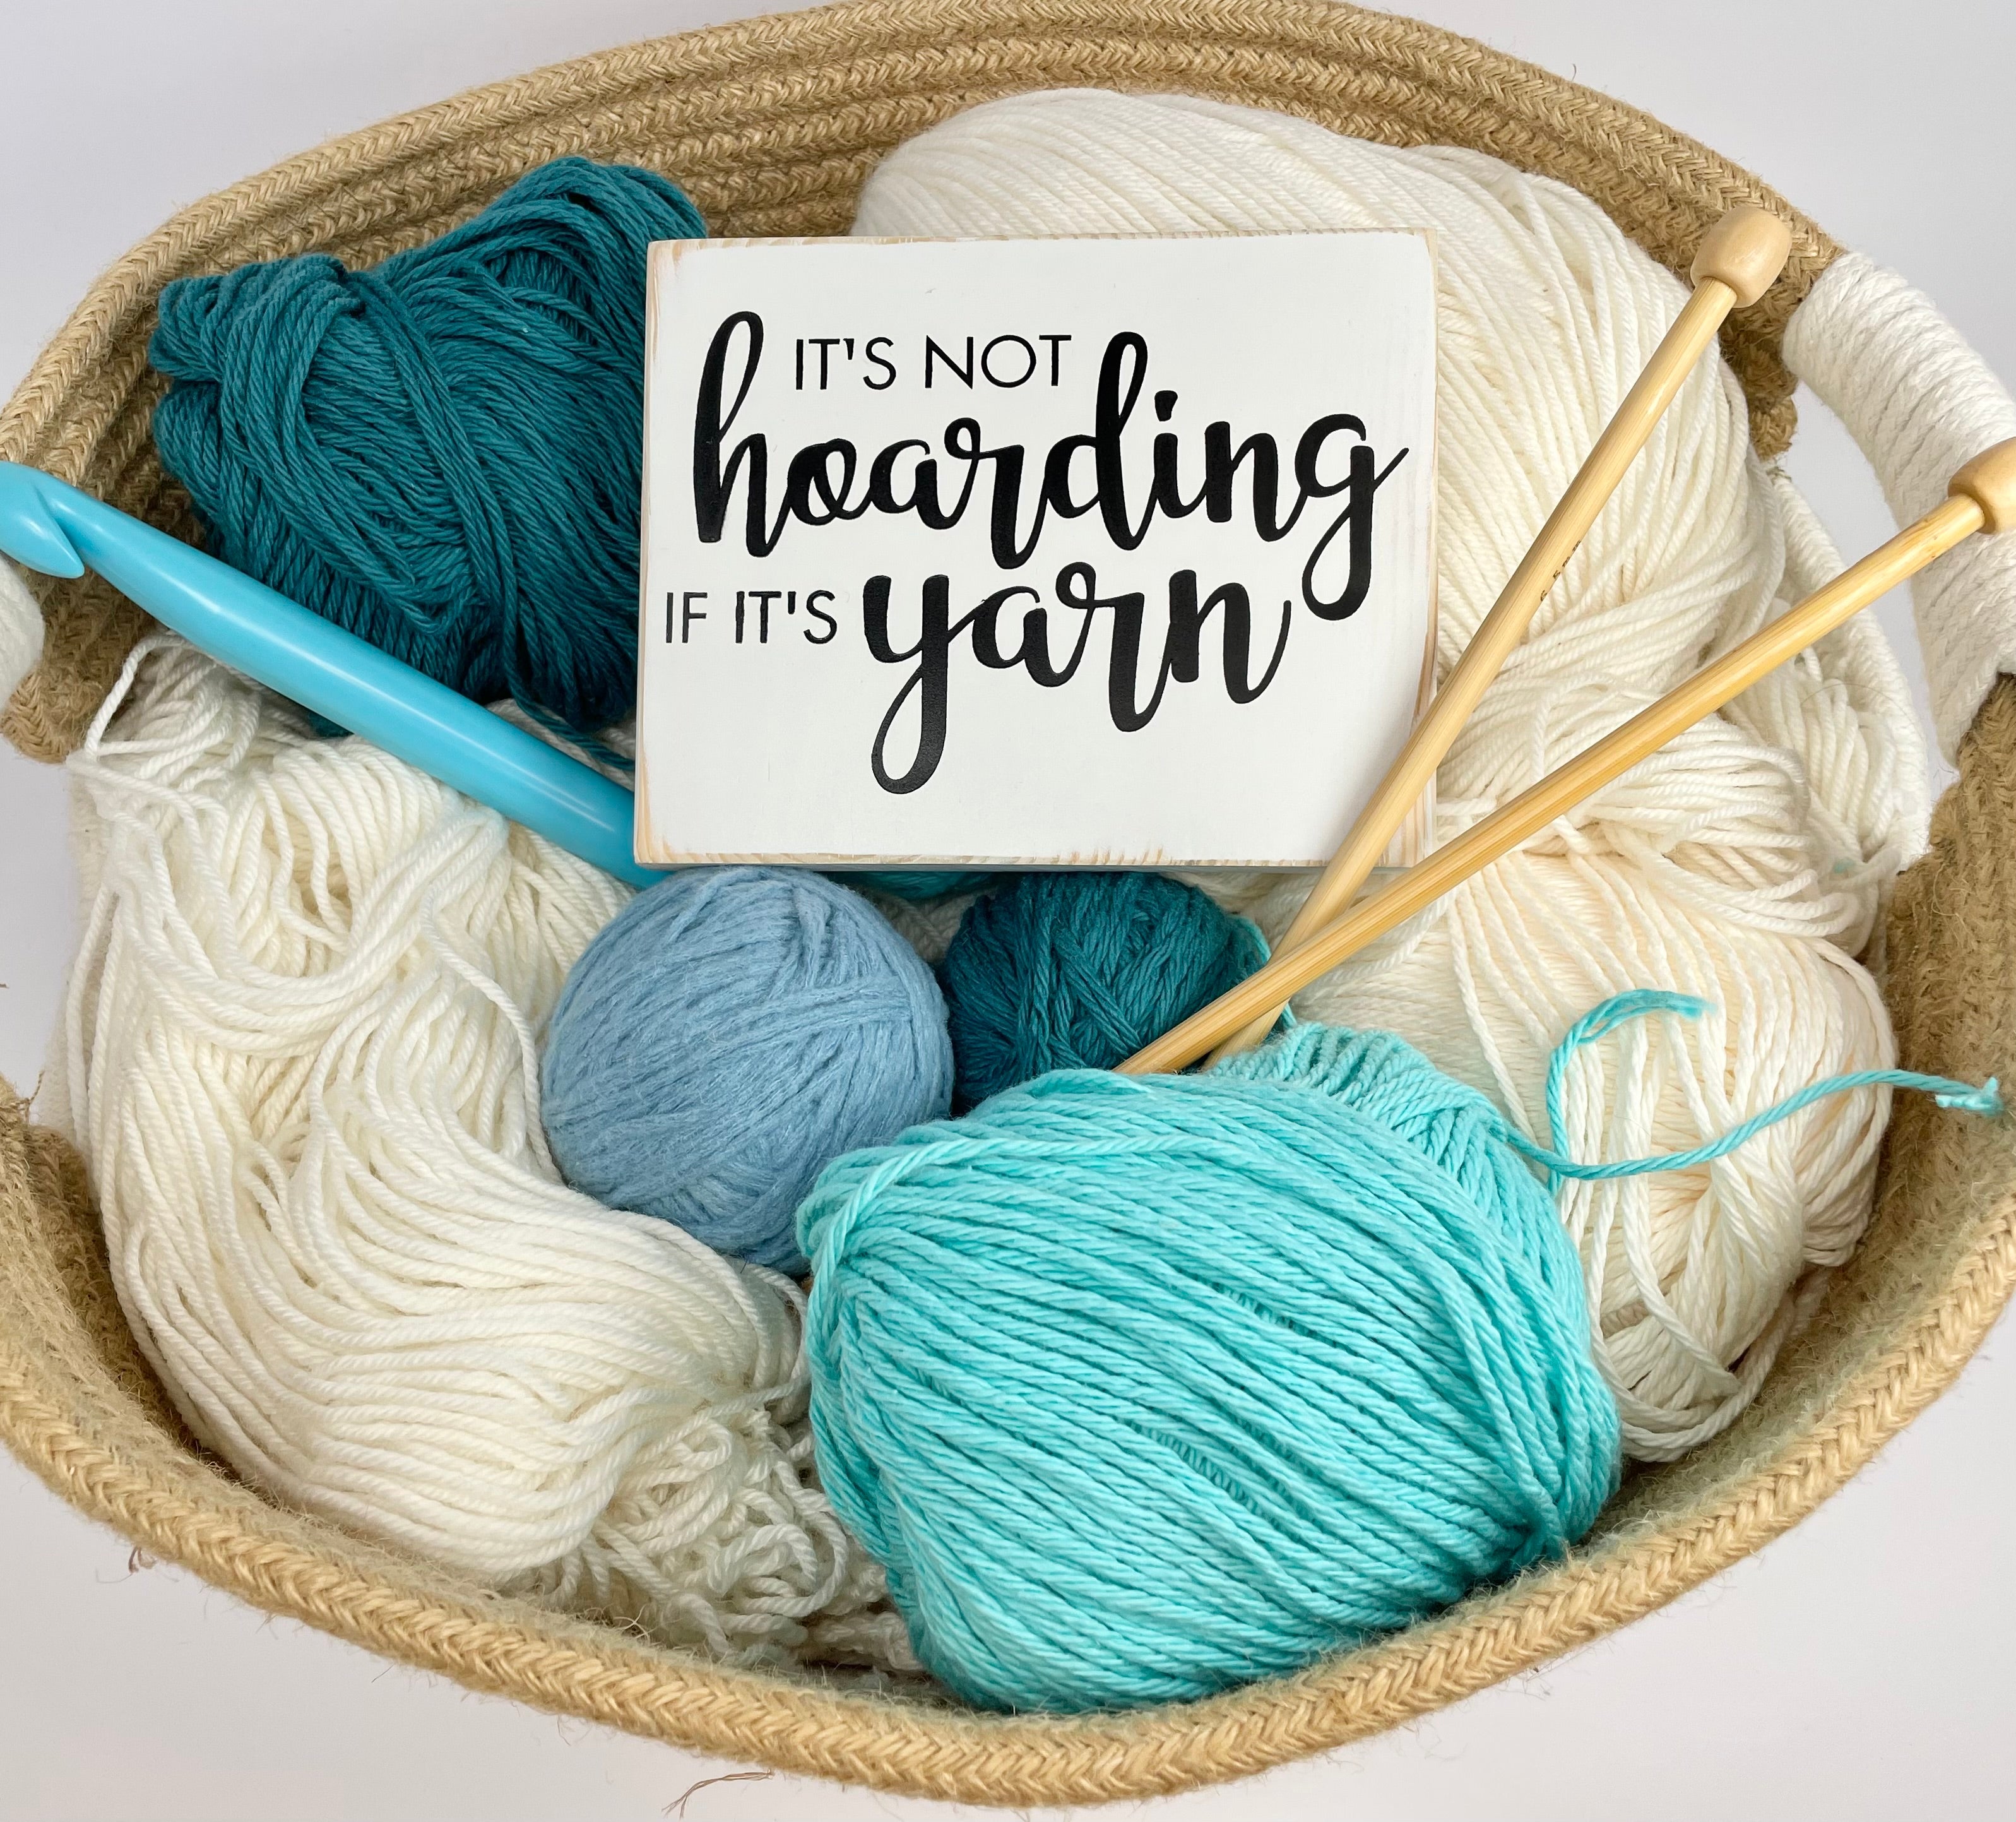 small wood sign painted white with black lettering that reads, "It's not hoarding if it's yarn"